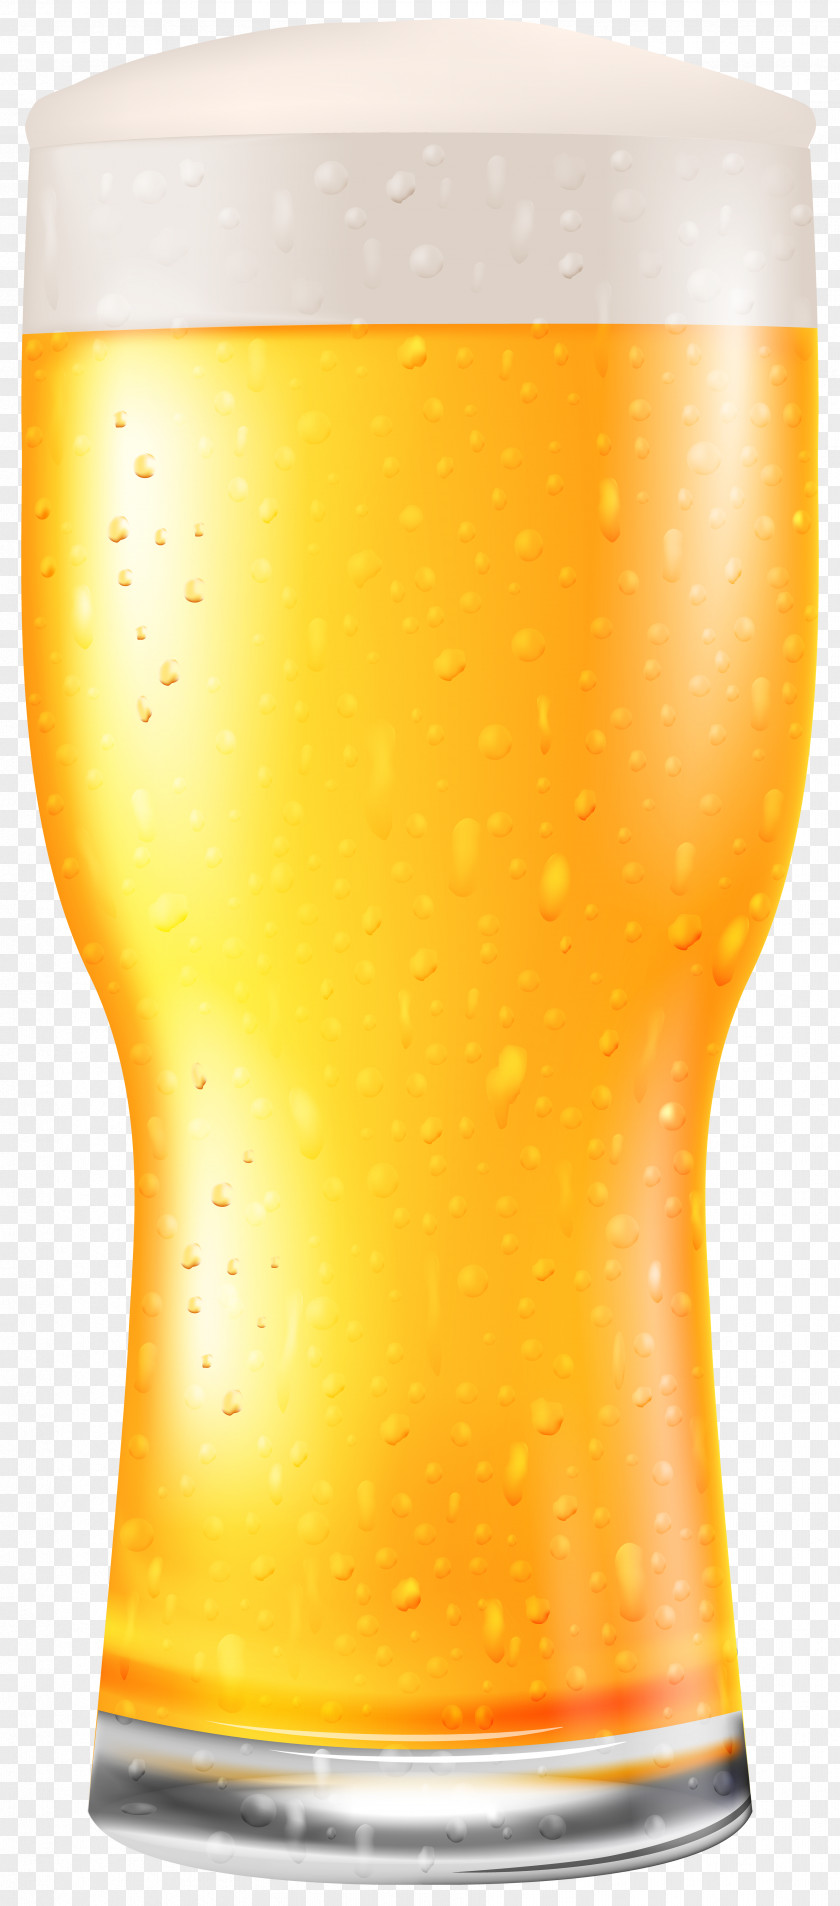 Glass With Beer Clip Art Image Wheat Orange Juice Soft Drink PNG